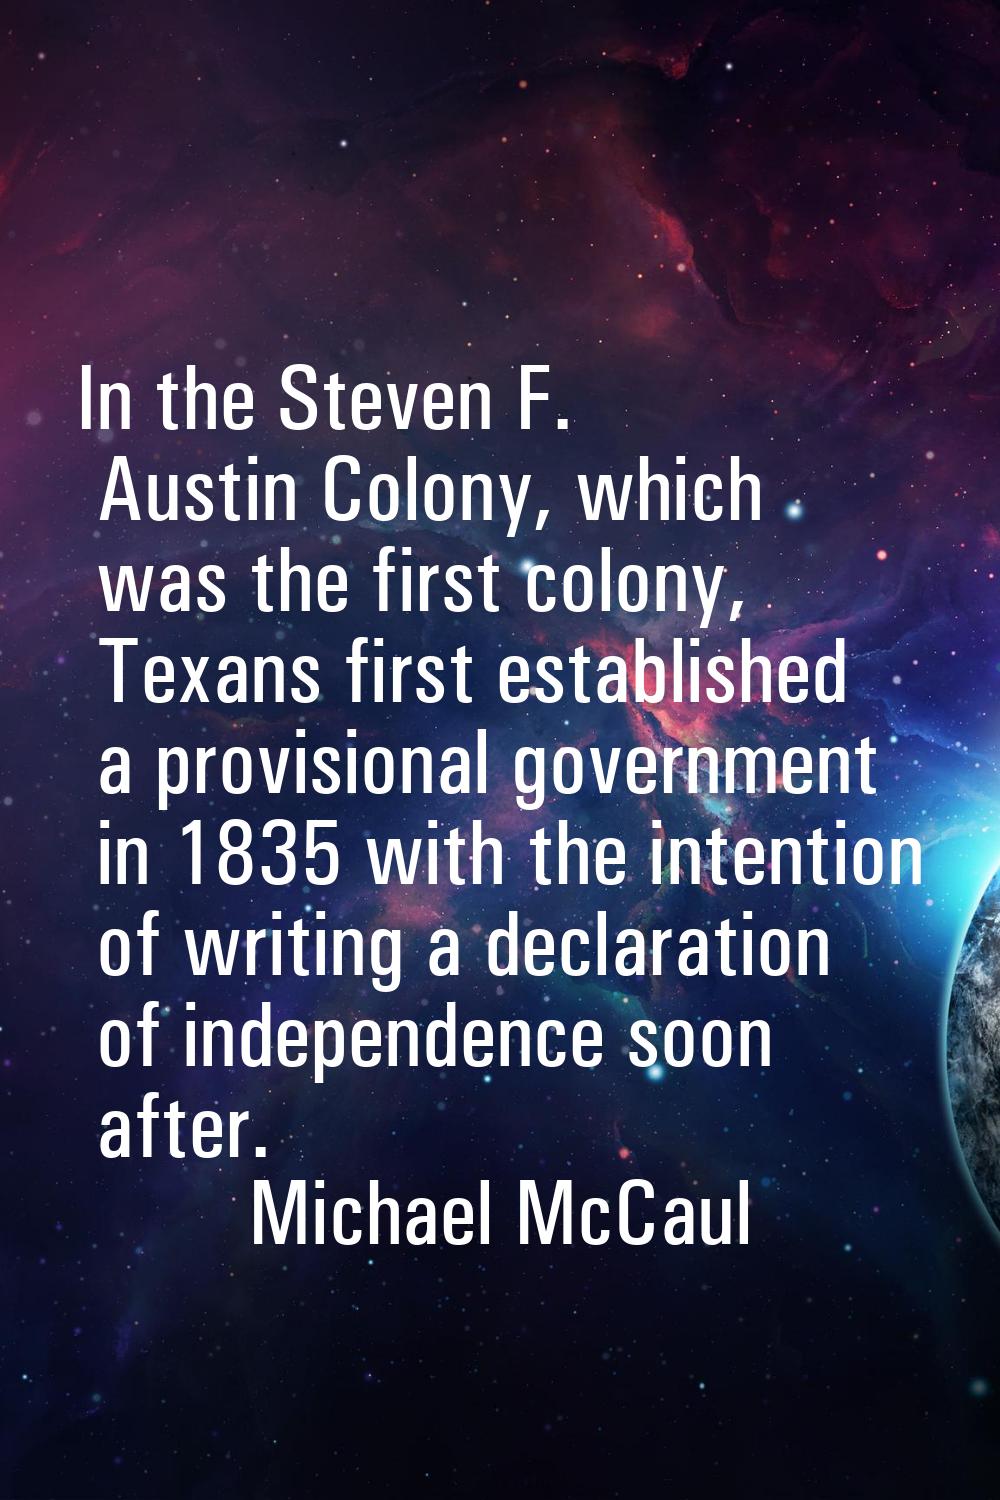 In the Steven F. Austin Colony, which was the first colony, Texans first established a provisional 